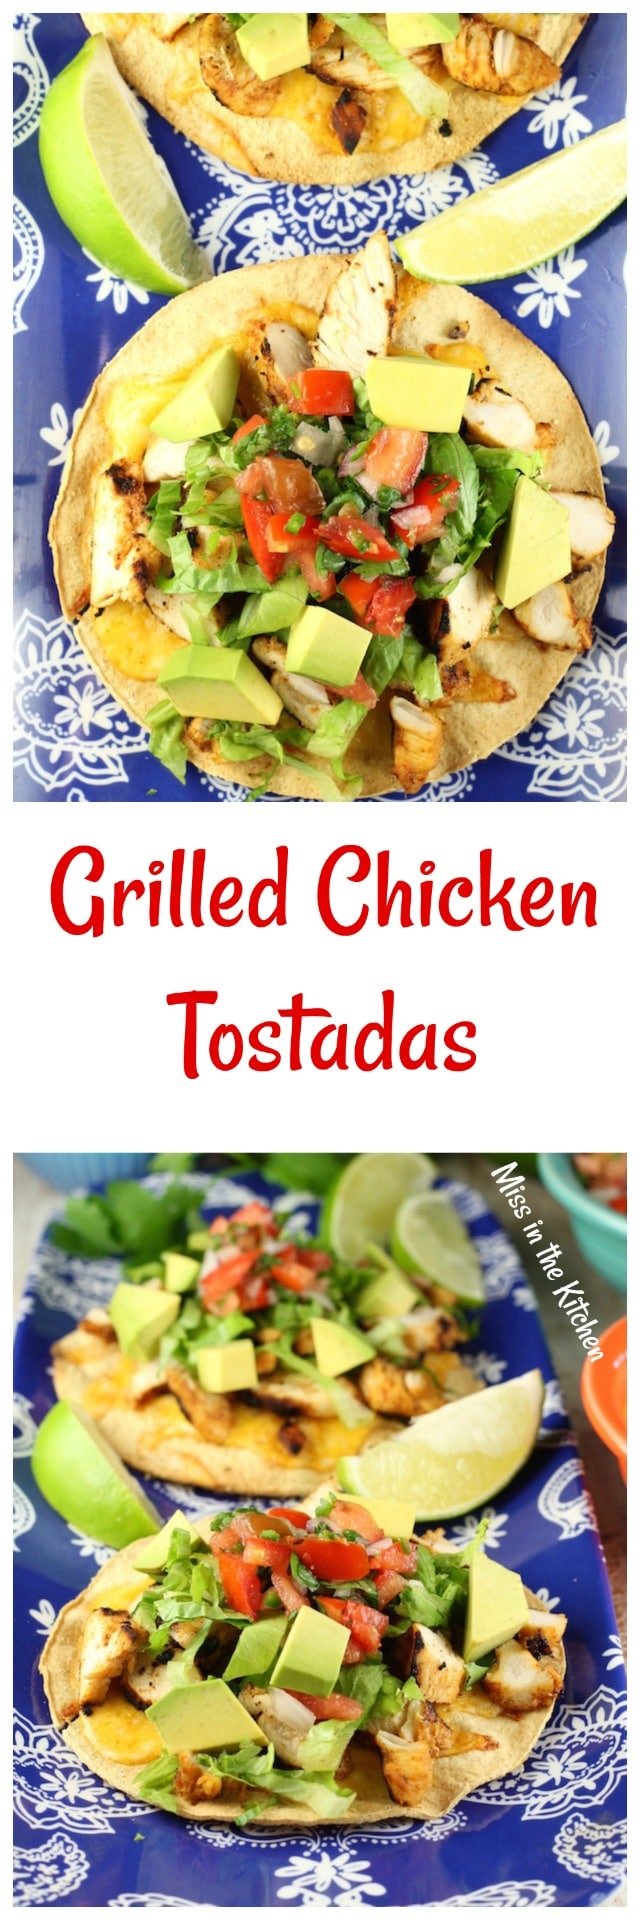 Grilled Chicken Tostadas Recipe from MissintheKitchen.com #sponsored by Produce for Kids